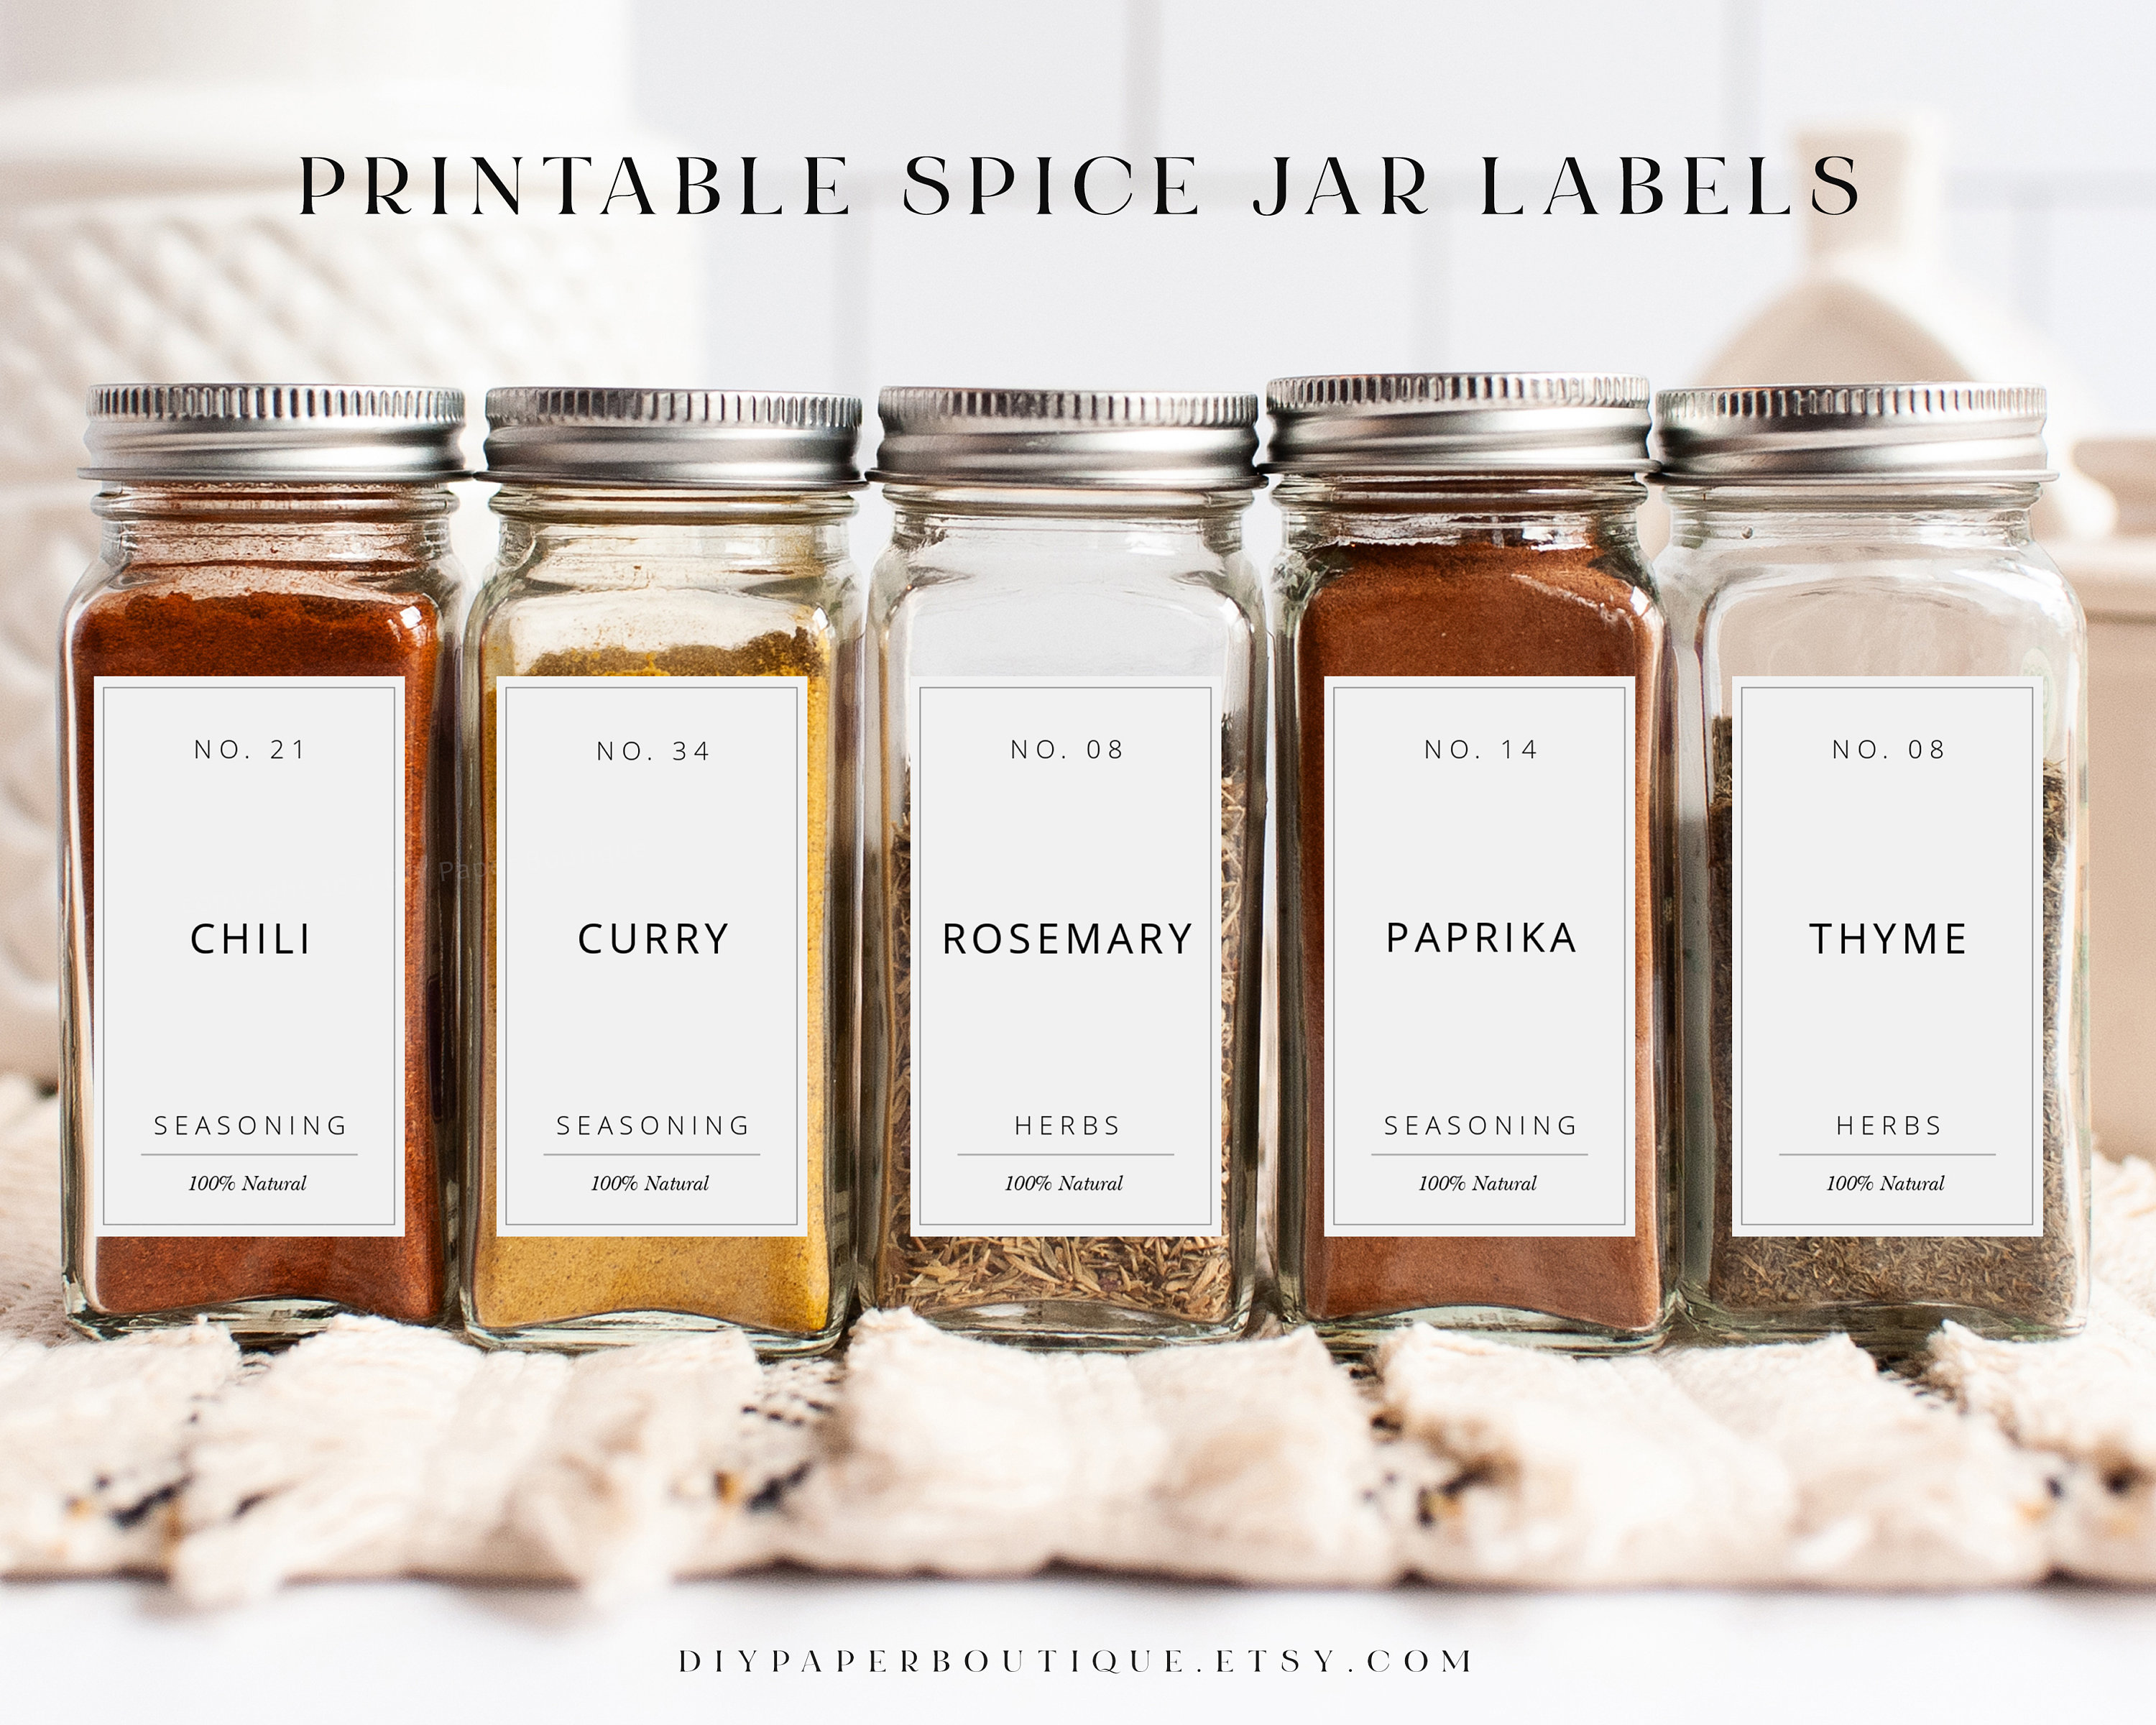 Use These Free Printable Spice Jar Labels to Keep Your Kitchen Organized